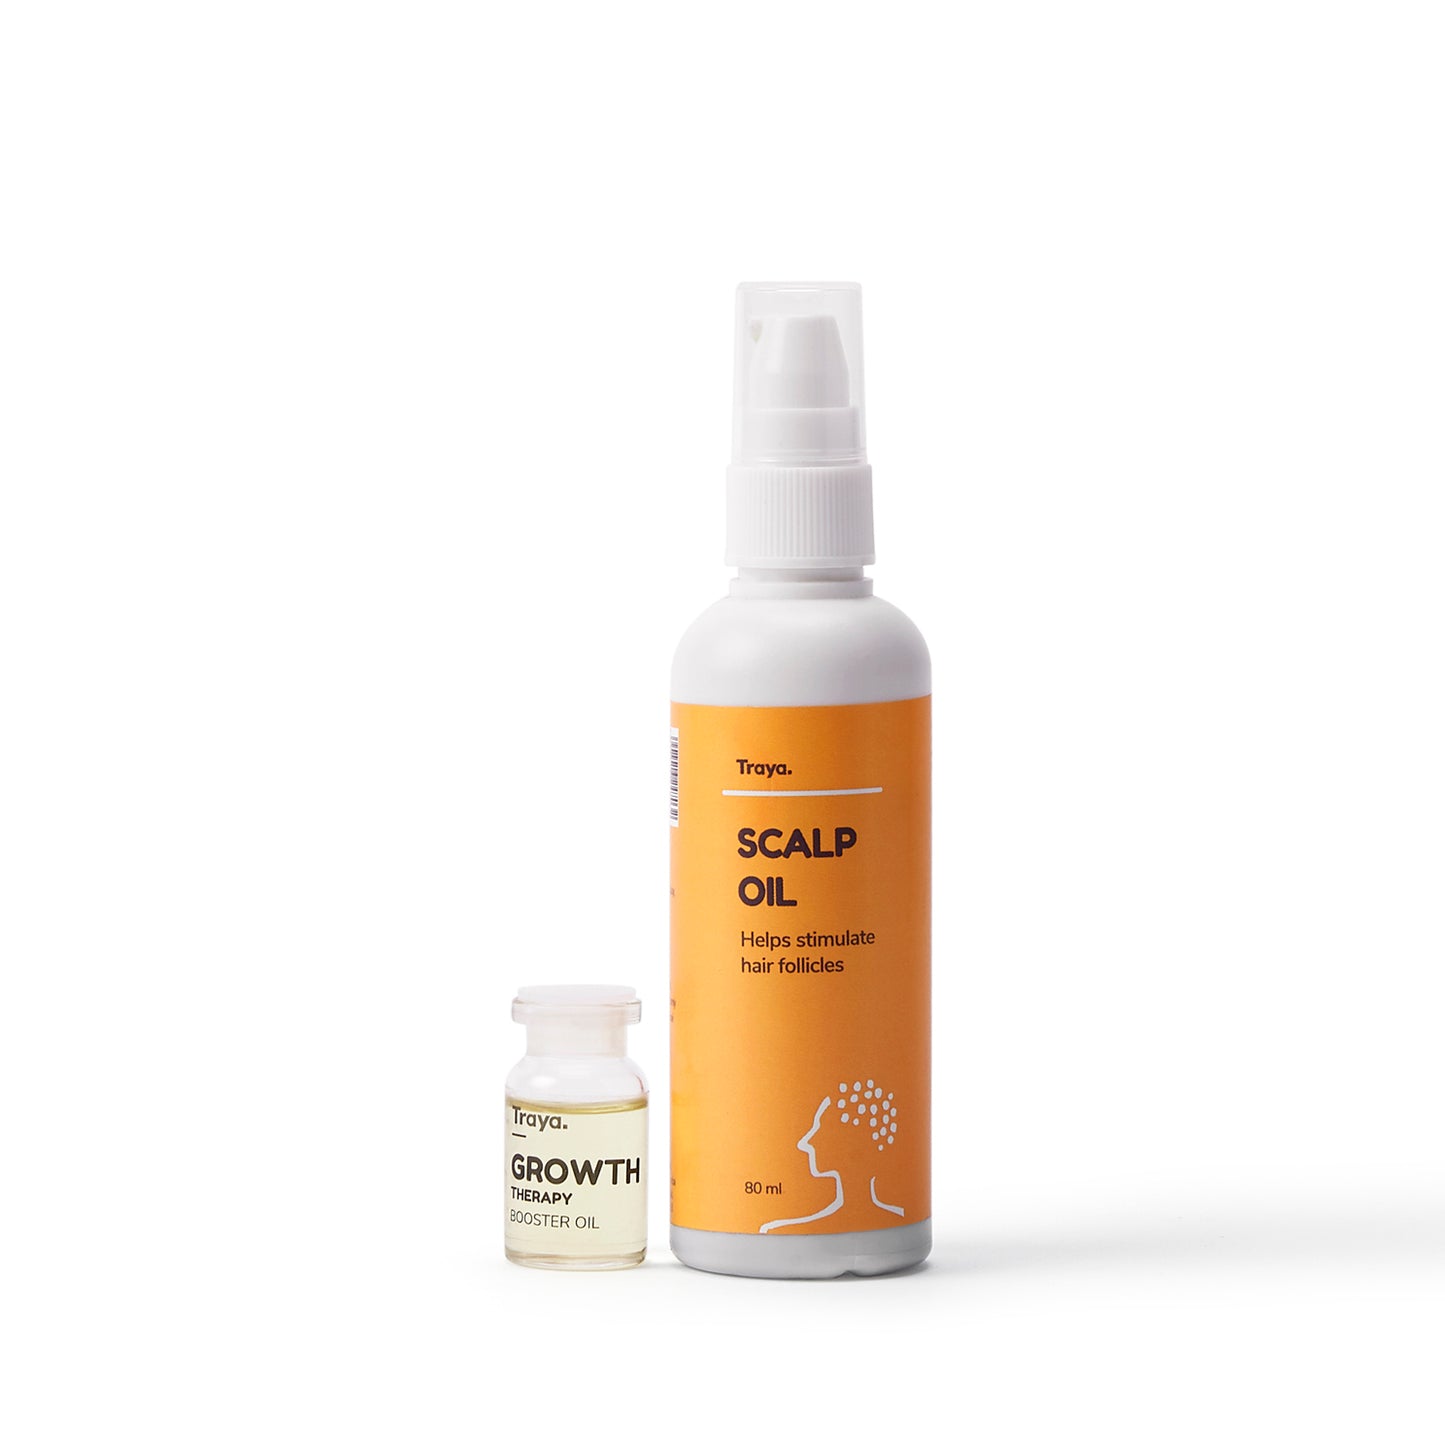 Scalp Oil with Growth Therapy Booster Shots | Contains ORPL, Wheat Germ and Motia Rosha